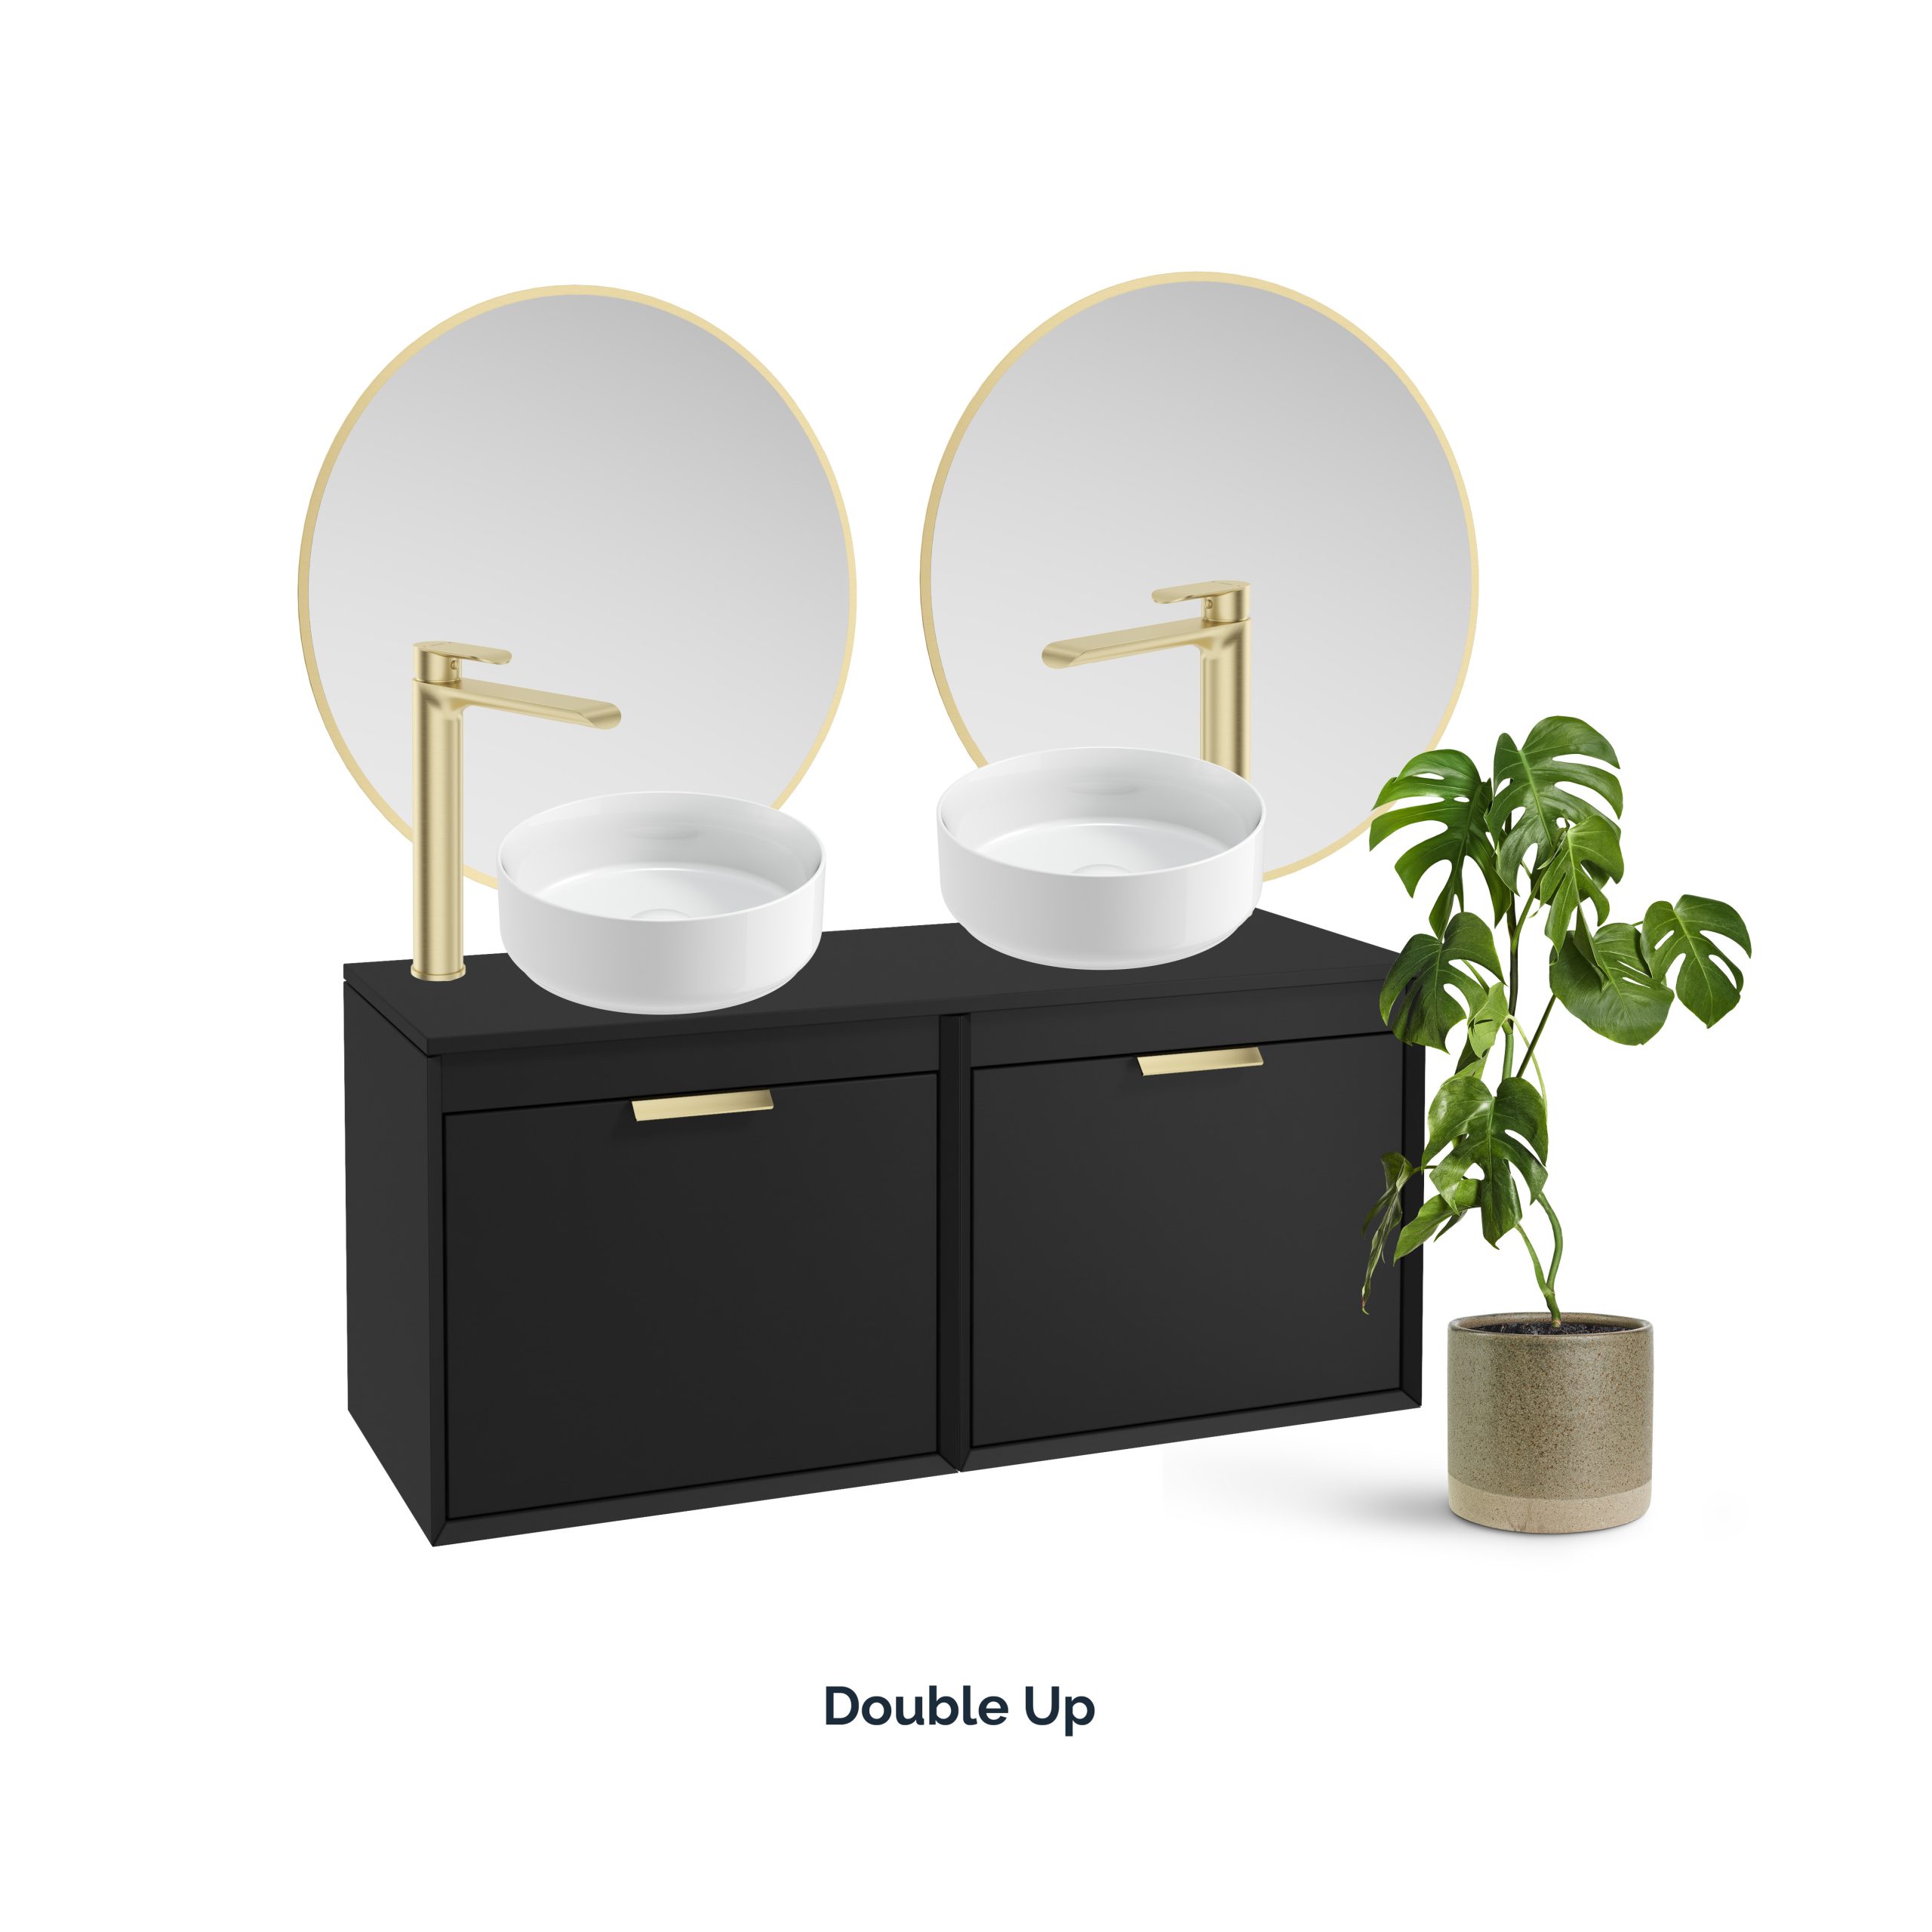 Embrace the efficiency and style of double vanities, offering both space and shared luxury.